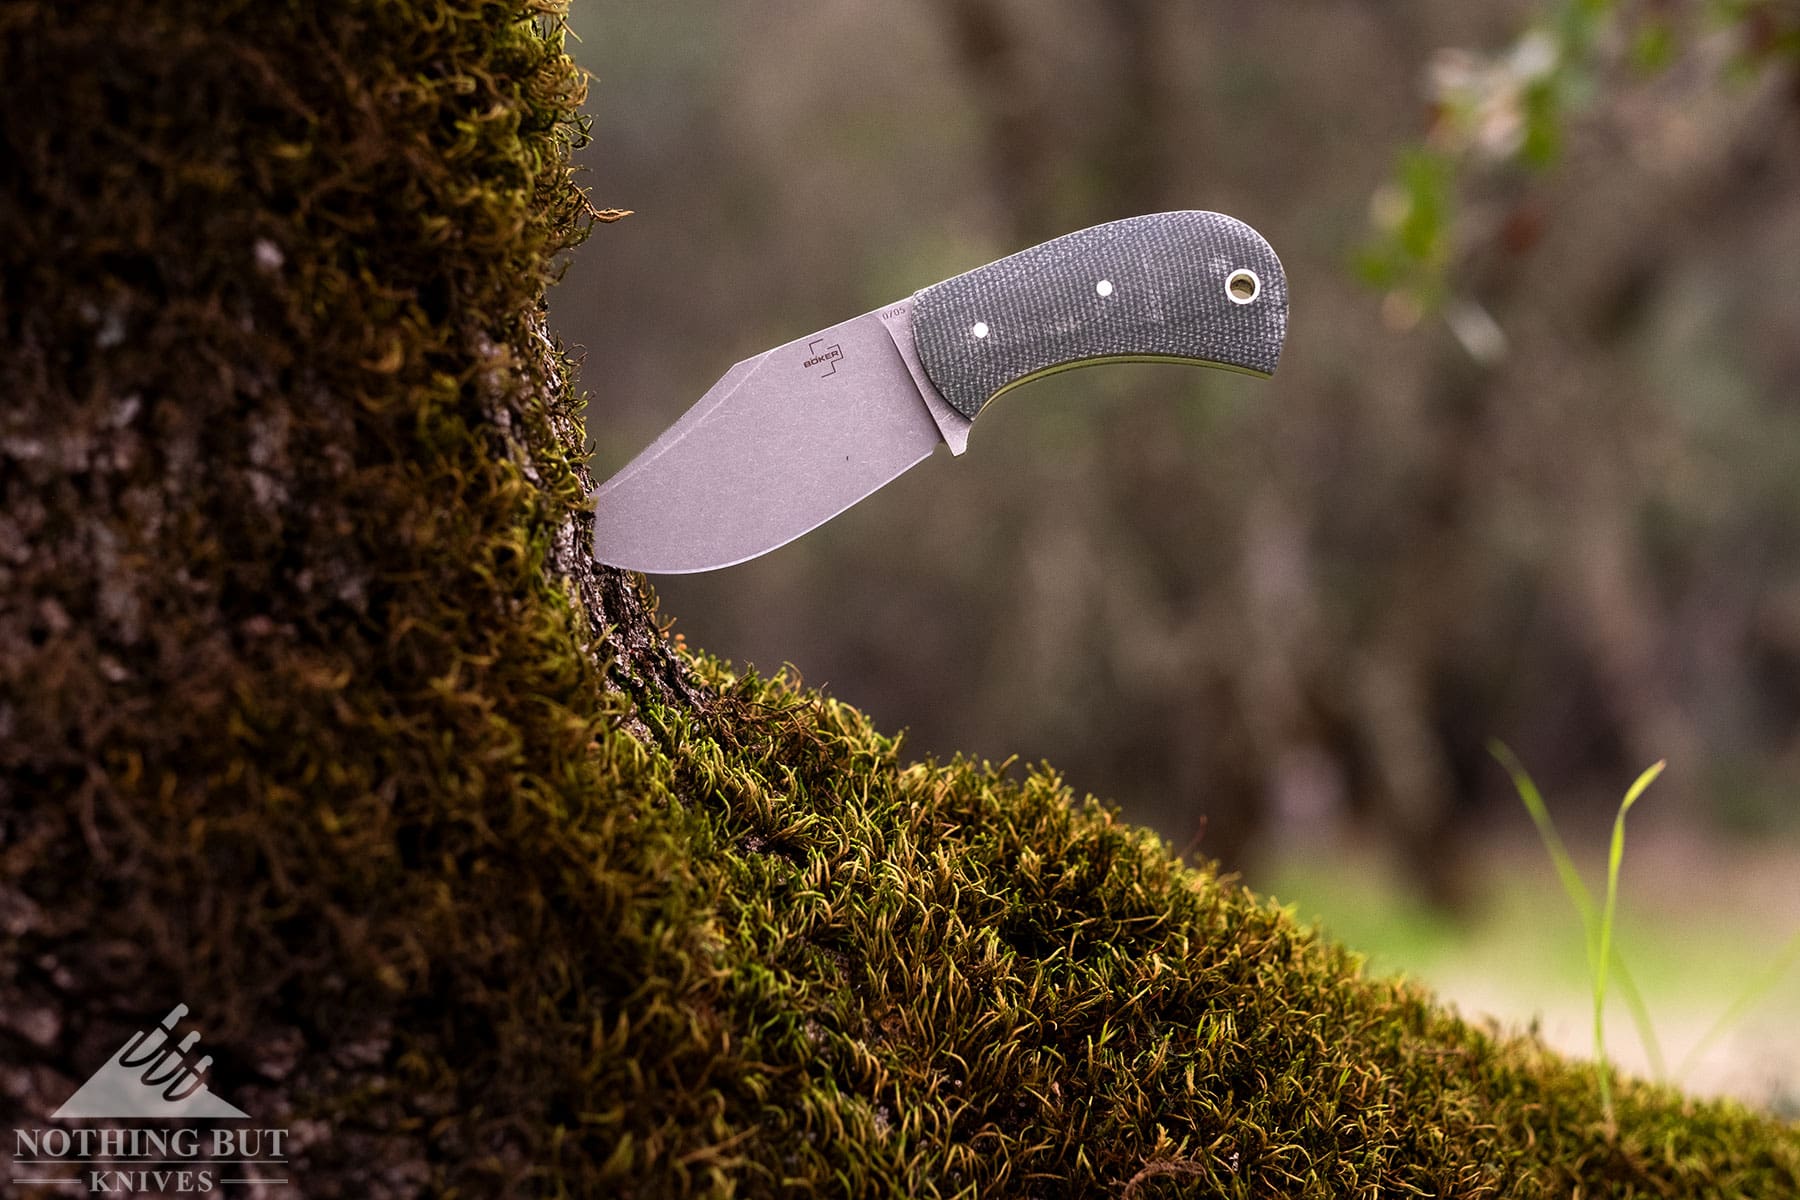 The Boker Plus Madman sticking out of a moss-covered tree branch.